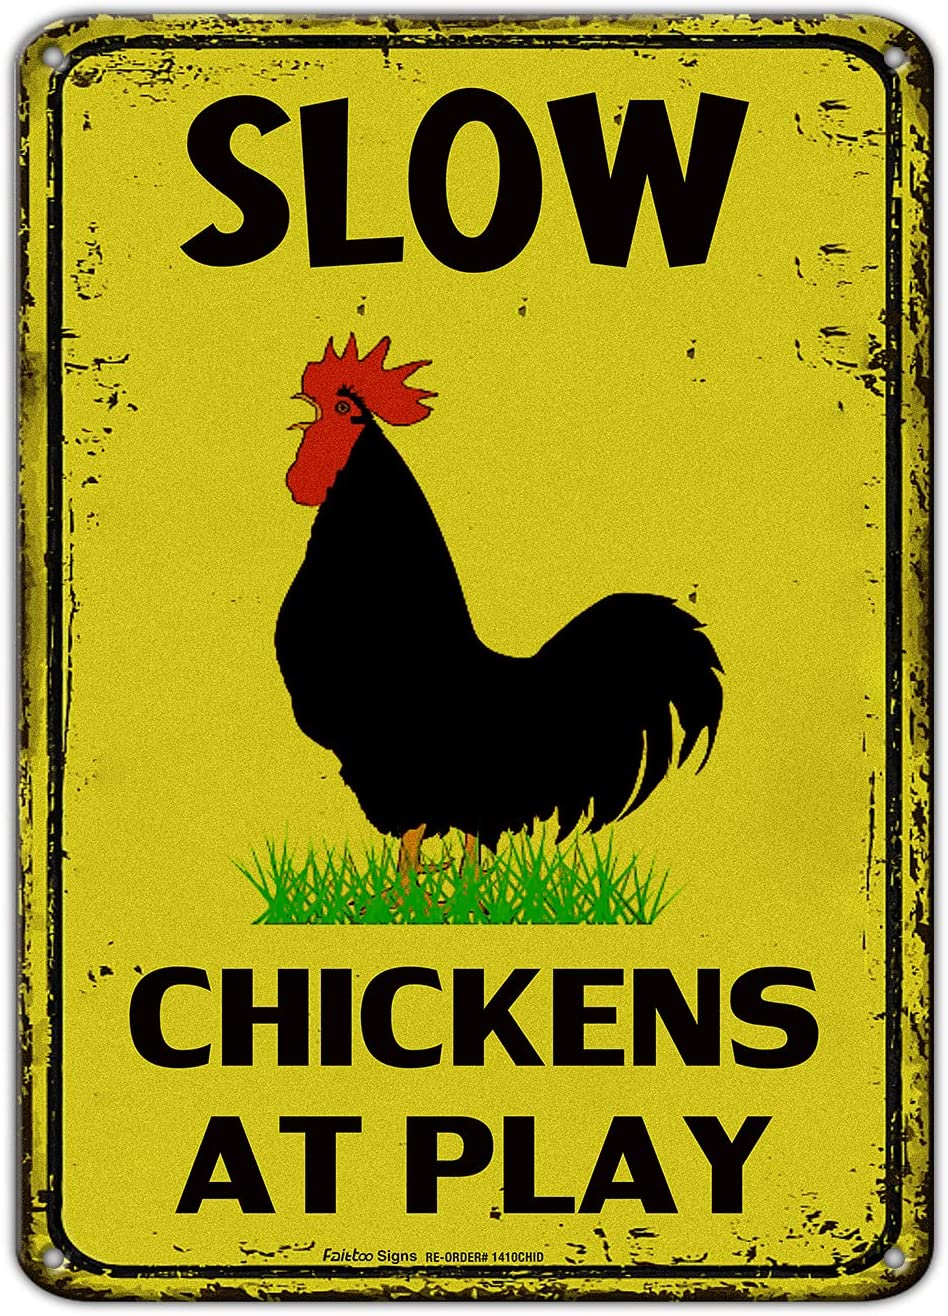 Slow Chickens at Play Caution or Chicken Crossing Sign, 14x10 Inch Rust Free Aluminum Metal Sign,Reflective,Fade Resistant,UV Protected,Weatherproof Up to 7 Years Indoor/Outdoor Use